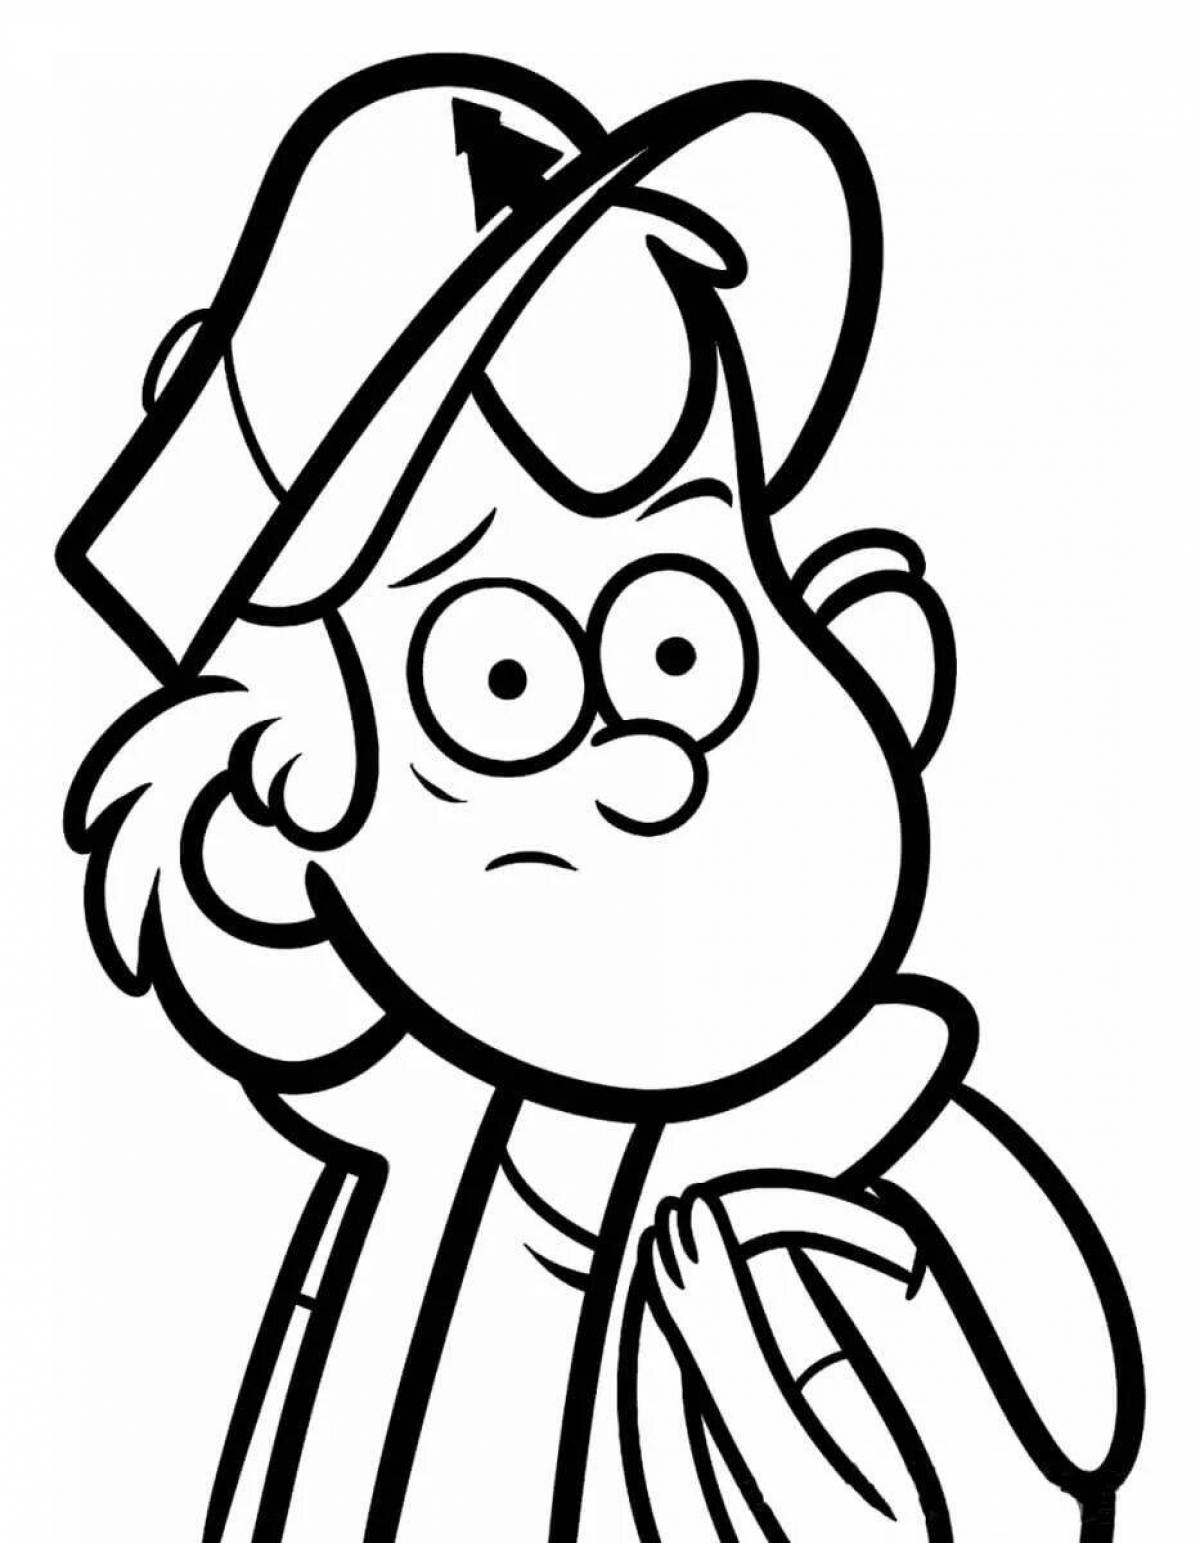 Majestic gravity falls coloring page